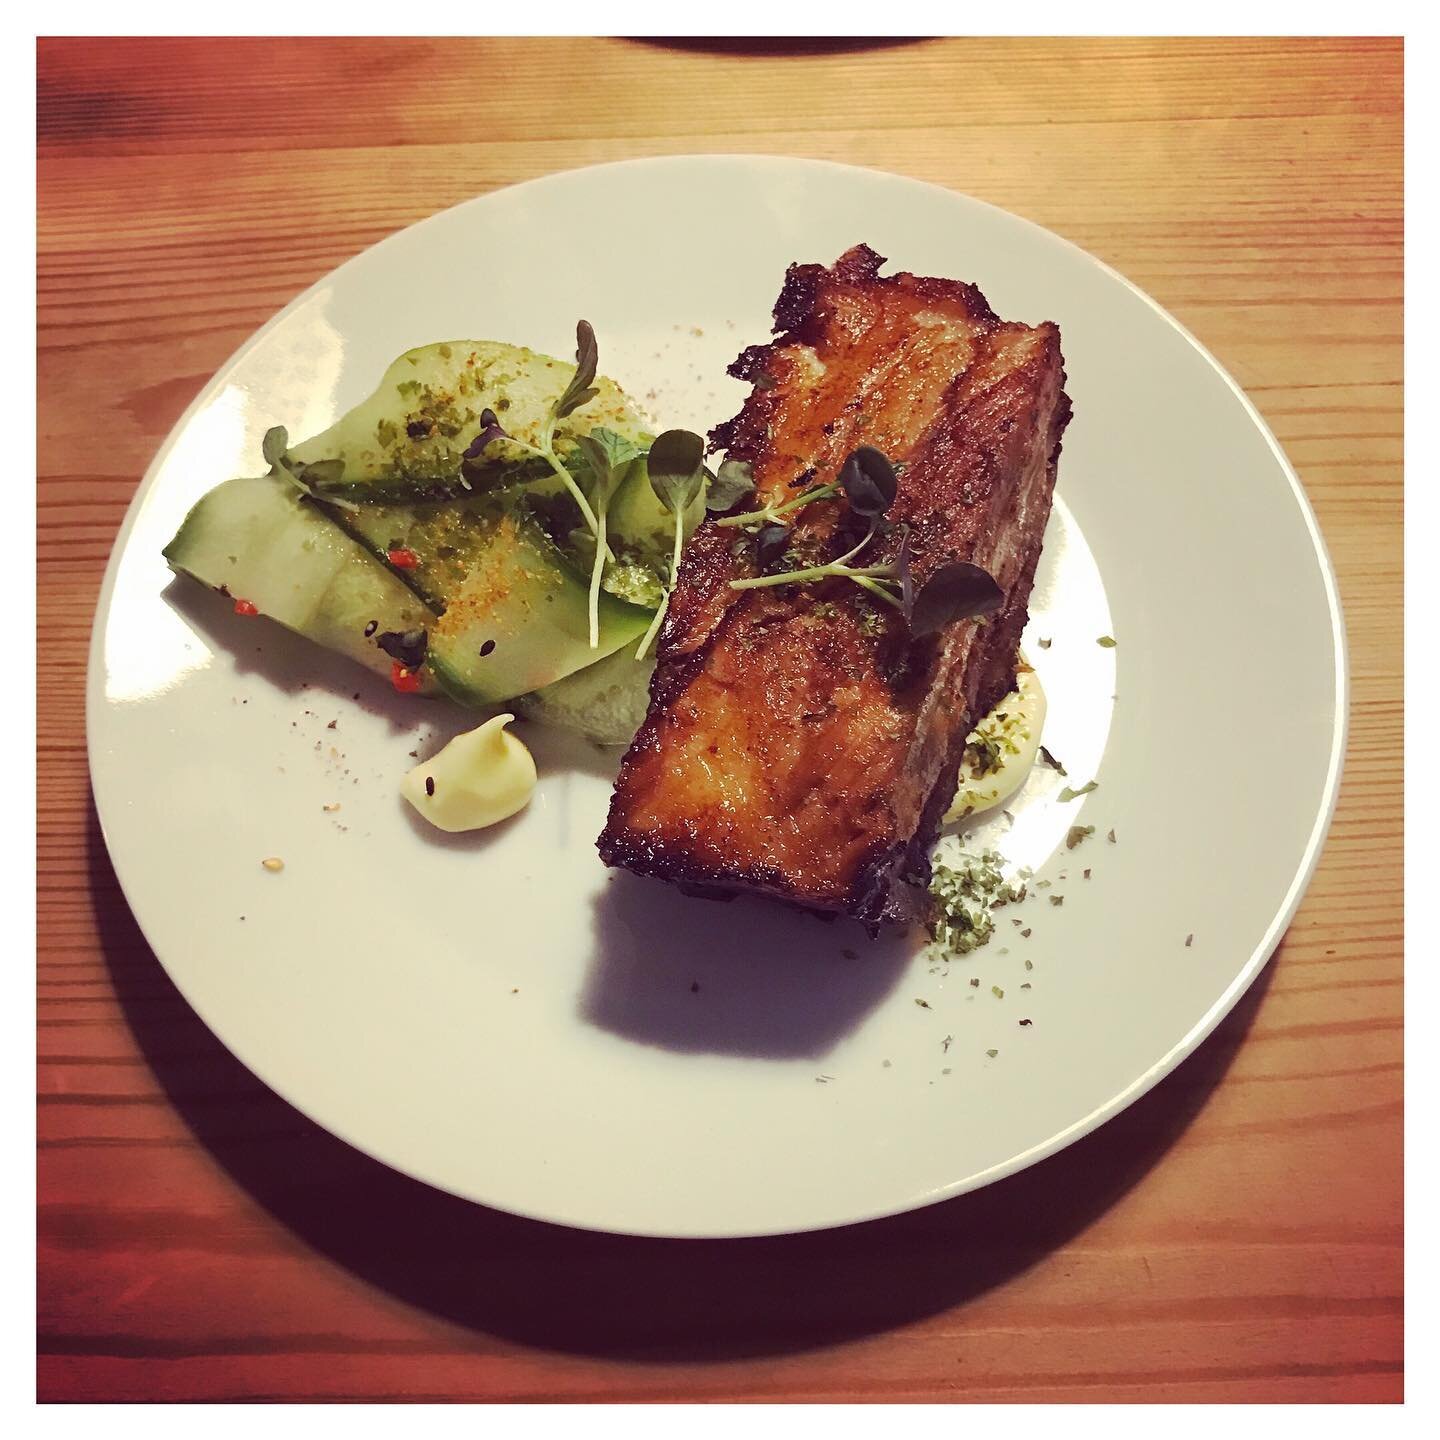 Japanese crispy pork belly, with pickled cucumber and nori salad. Delicious!